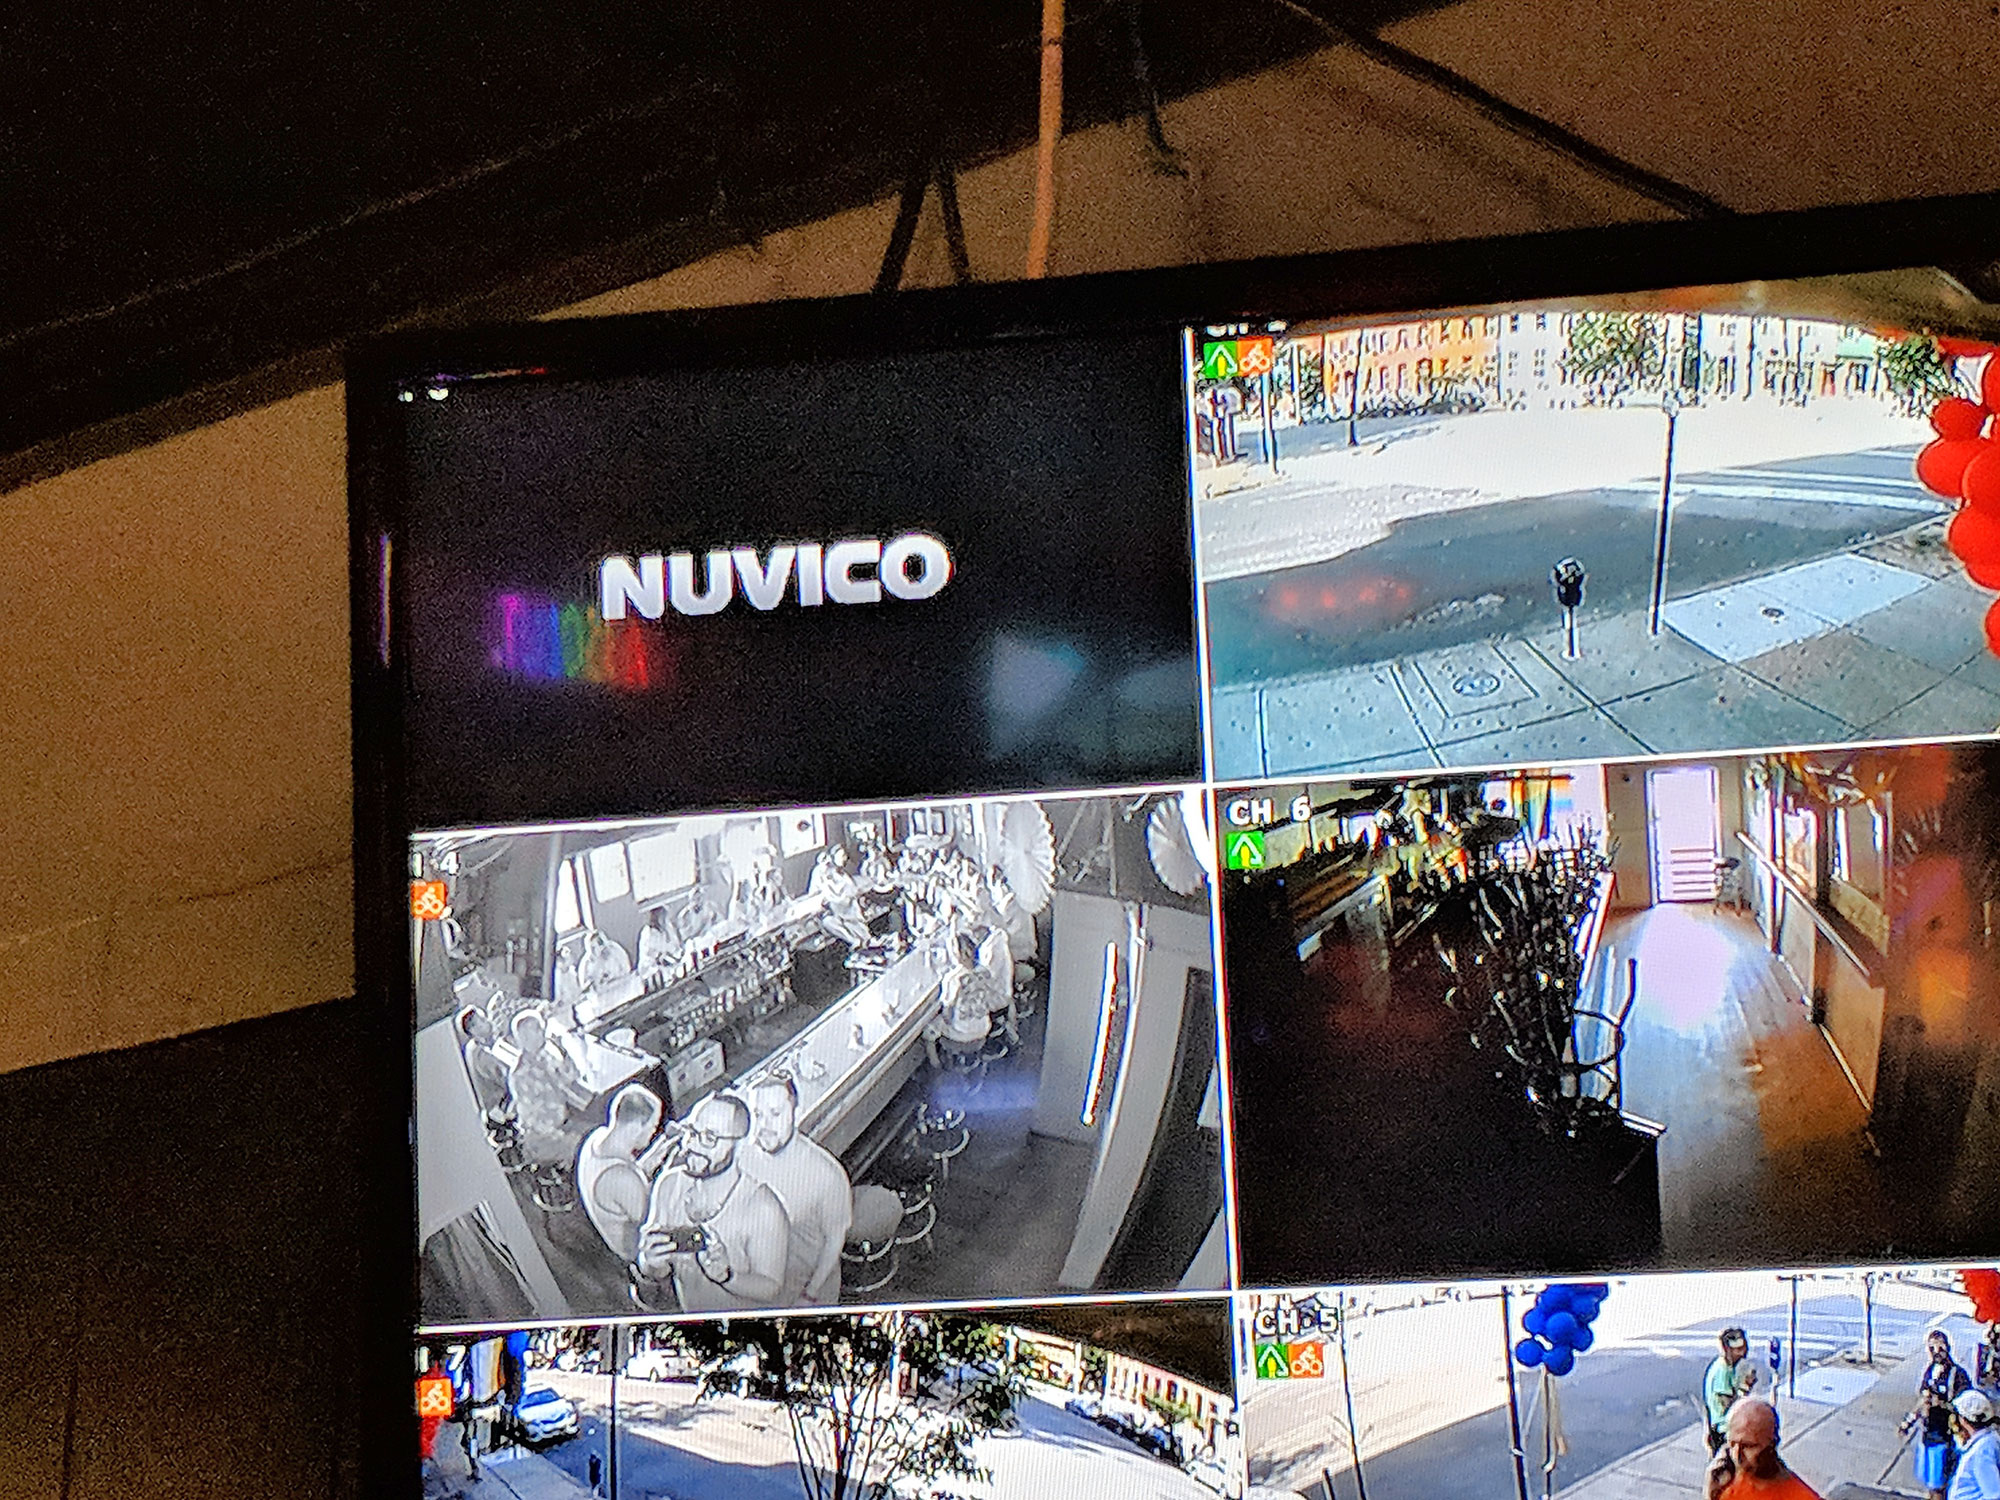 Can you spot us on the security camera at the Drinkery?